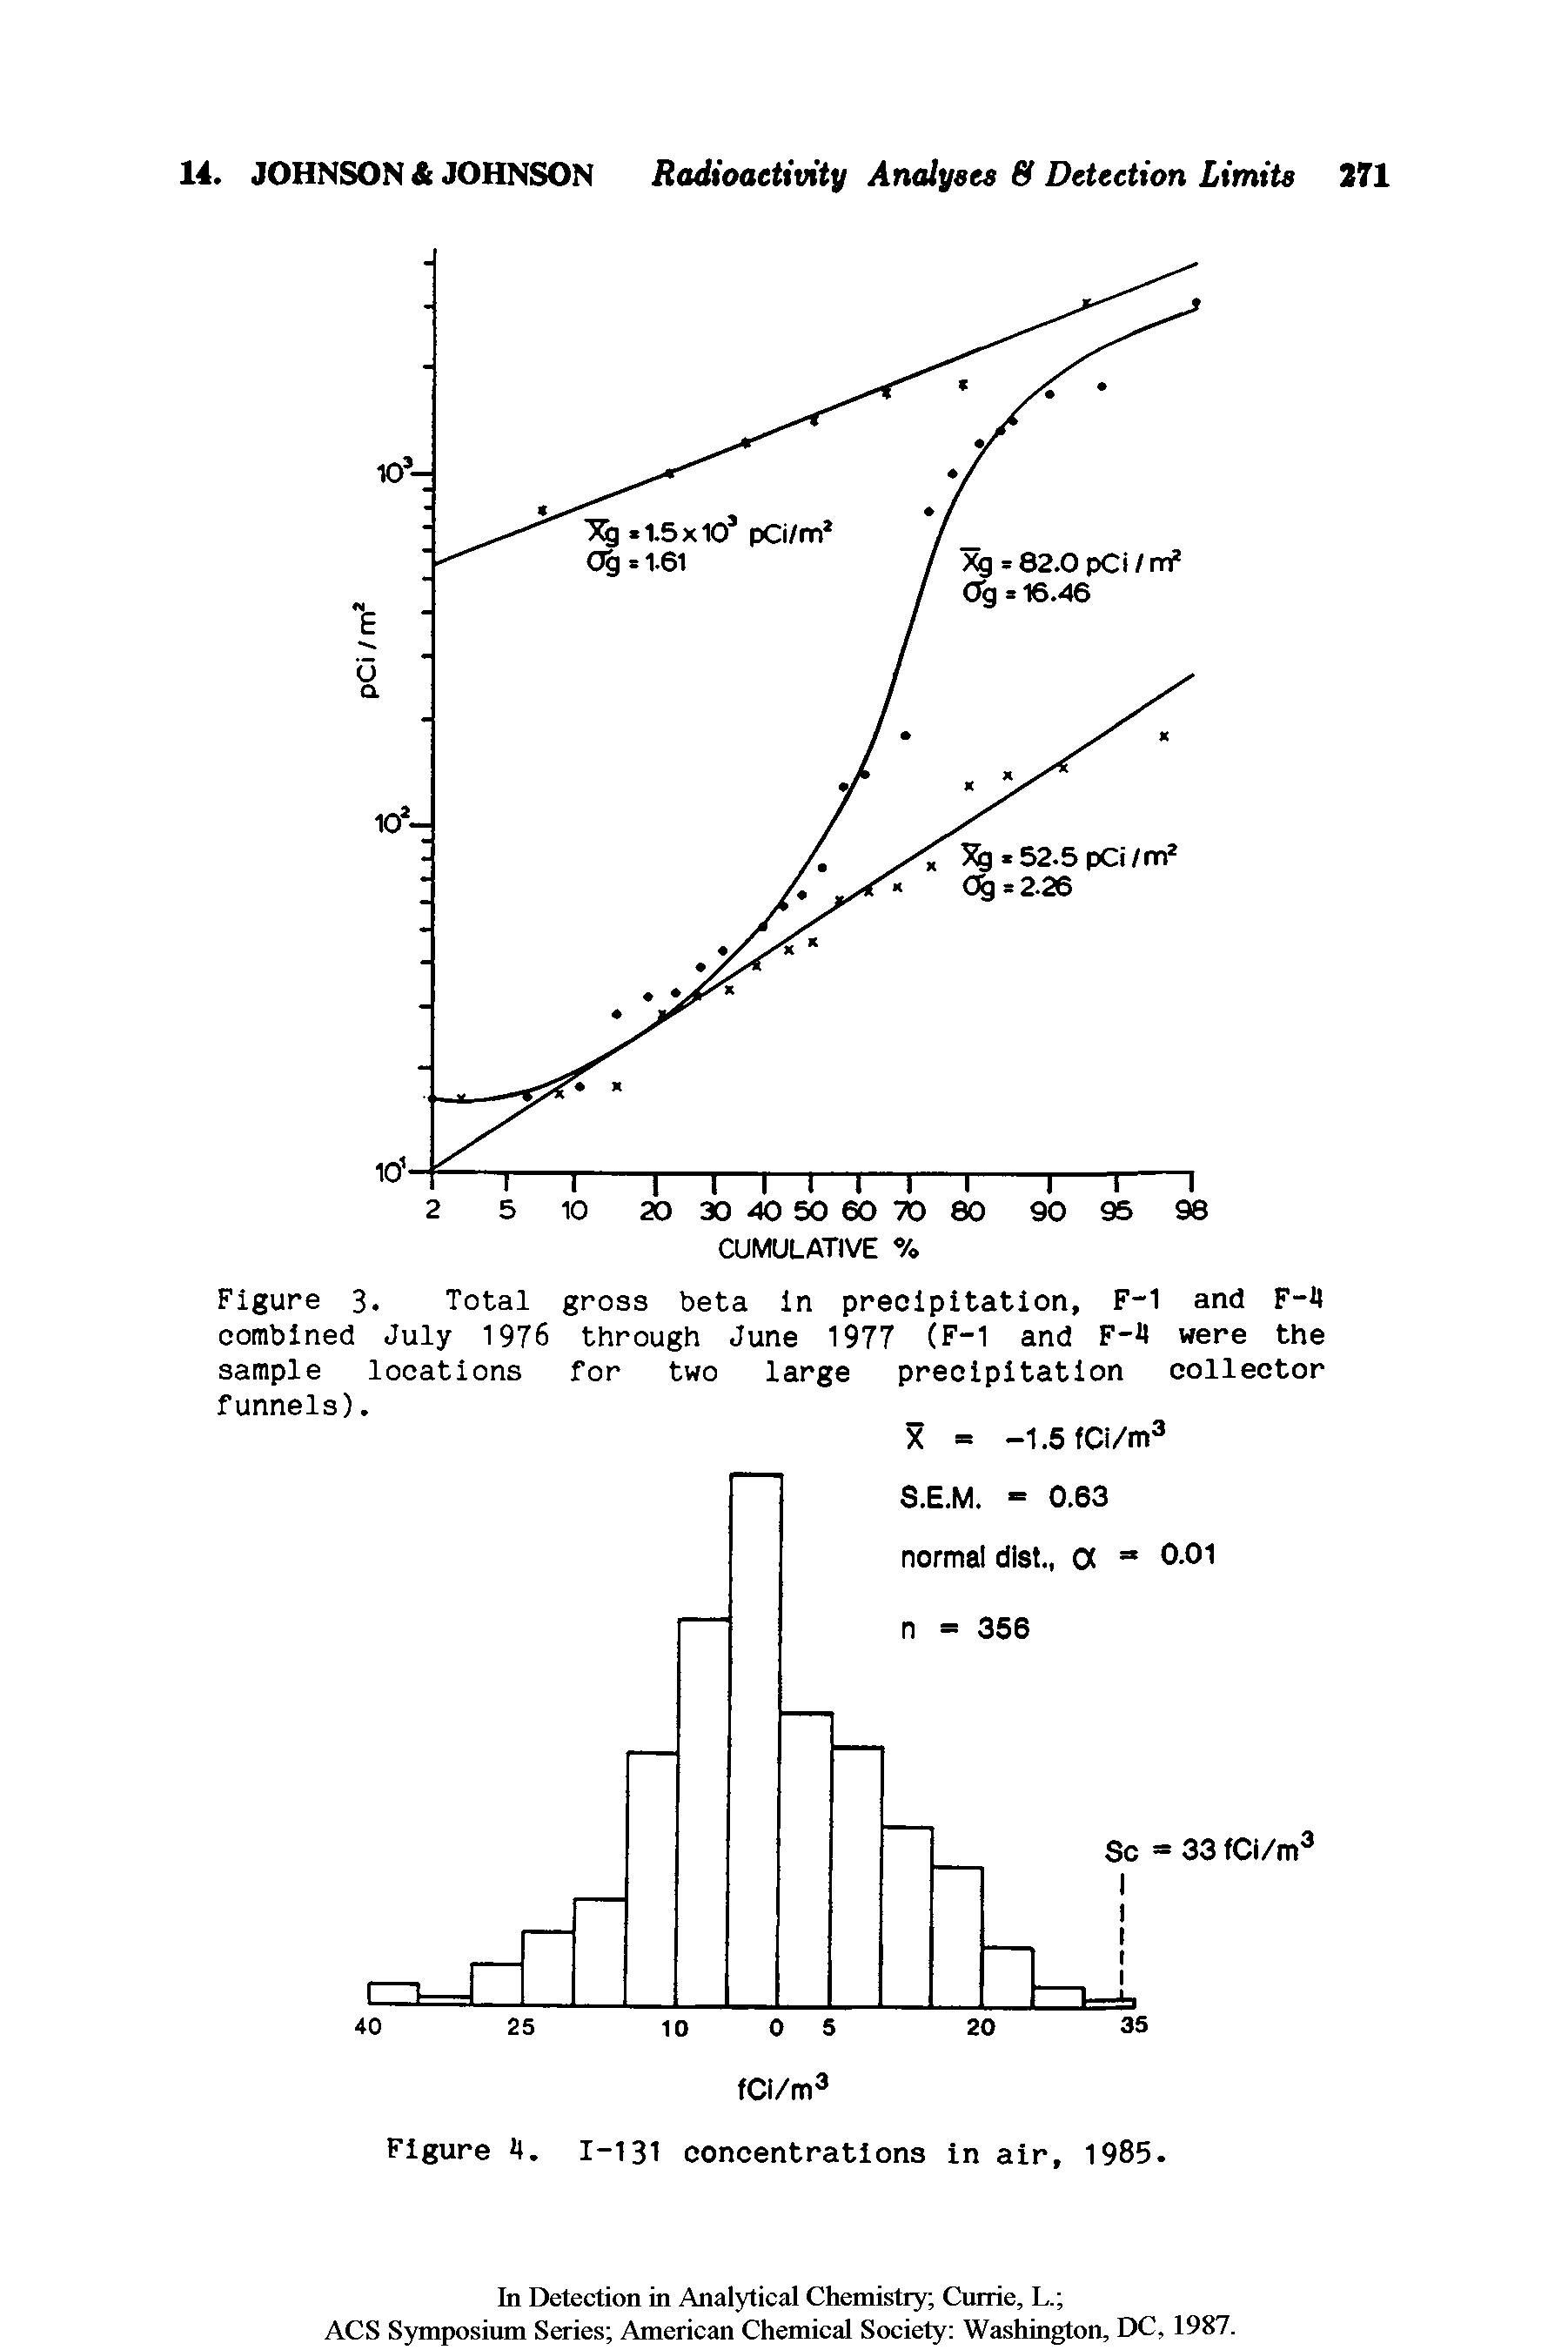 Figure 3, Total gross beta In precipitation, F-1 and F-il combined July 1976 through June 1977 (F-1 and F-H were the sample locations for two large precipitation collector funnels).